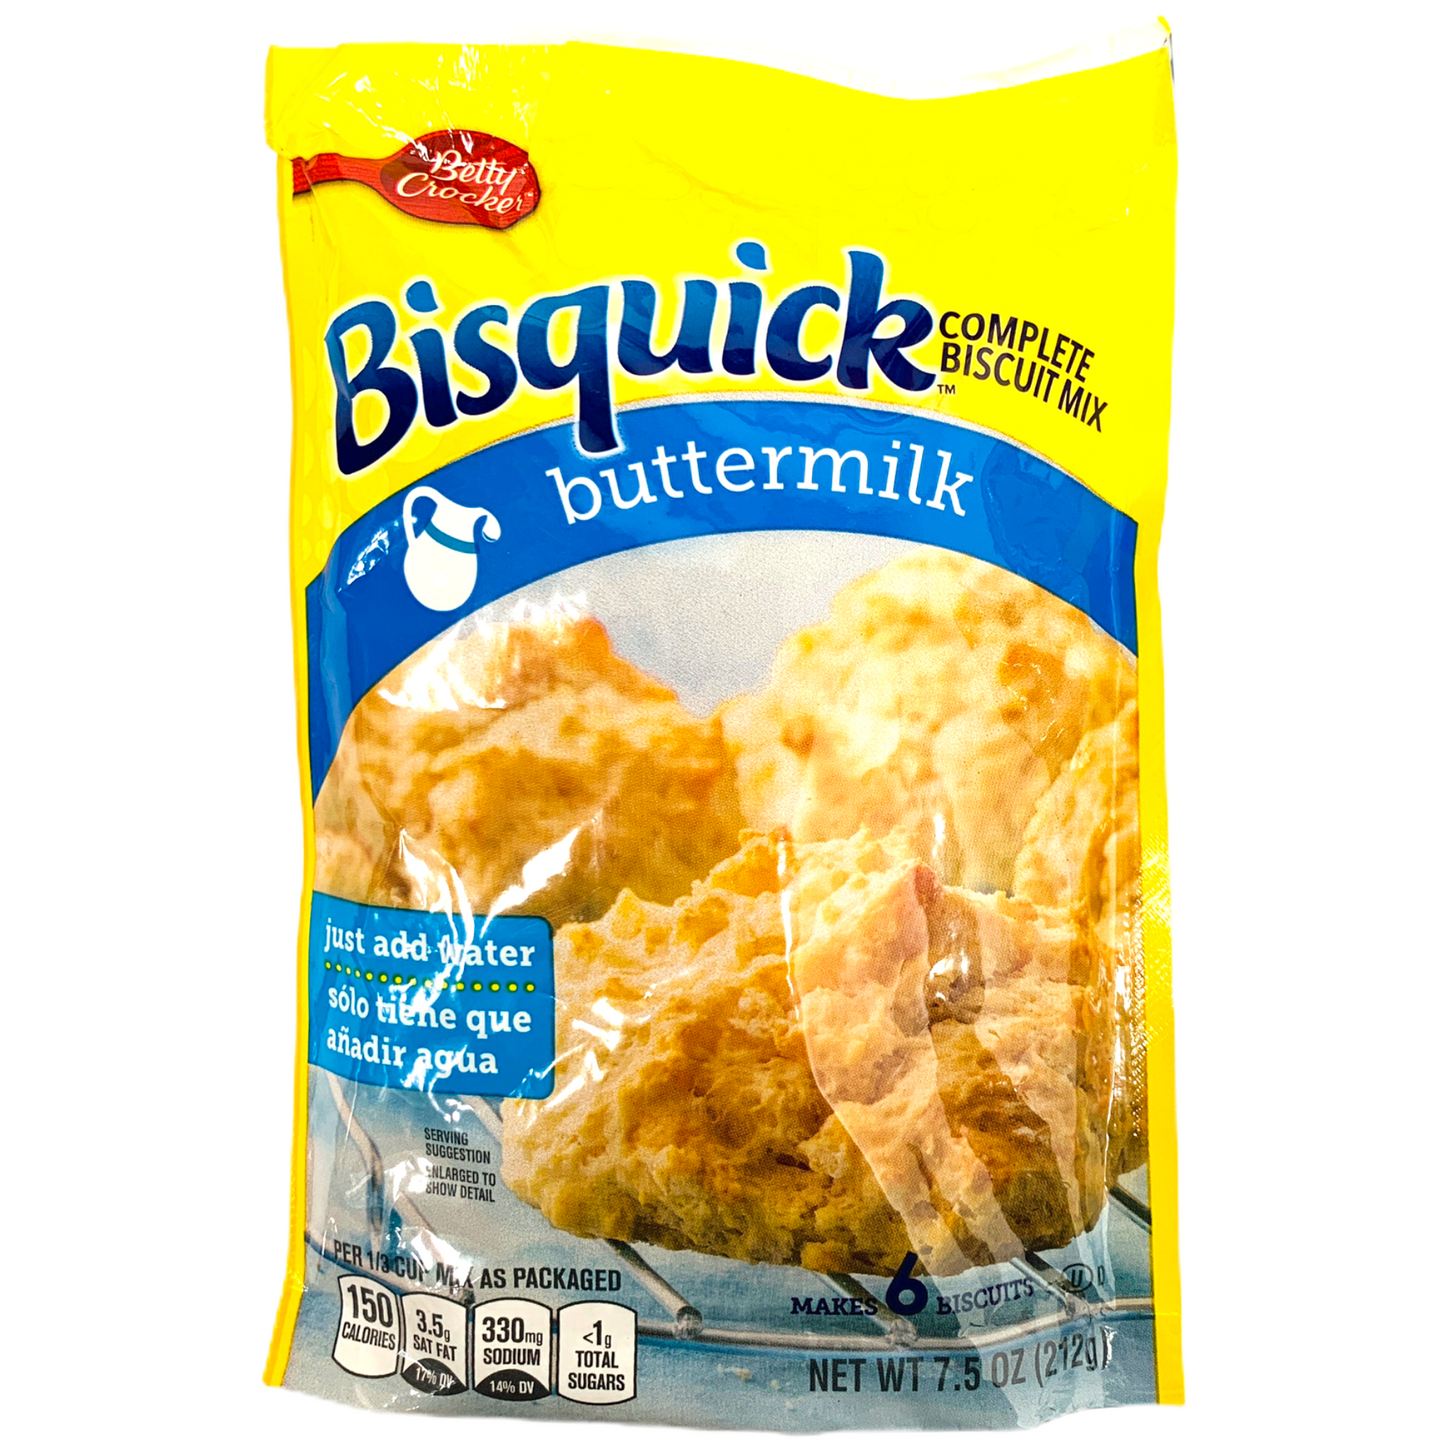 Betty Crocker Bisquick Buttermilk Complete Biscuit Mix 212g sold by American Grocer in the UK